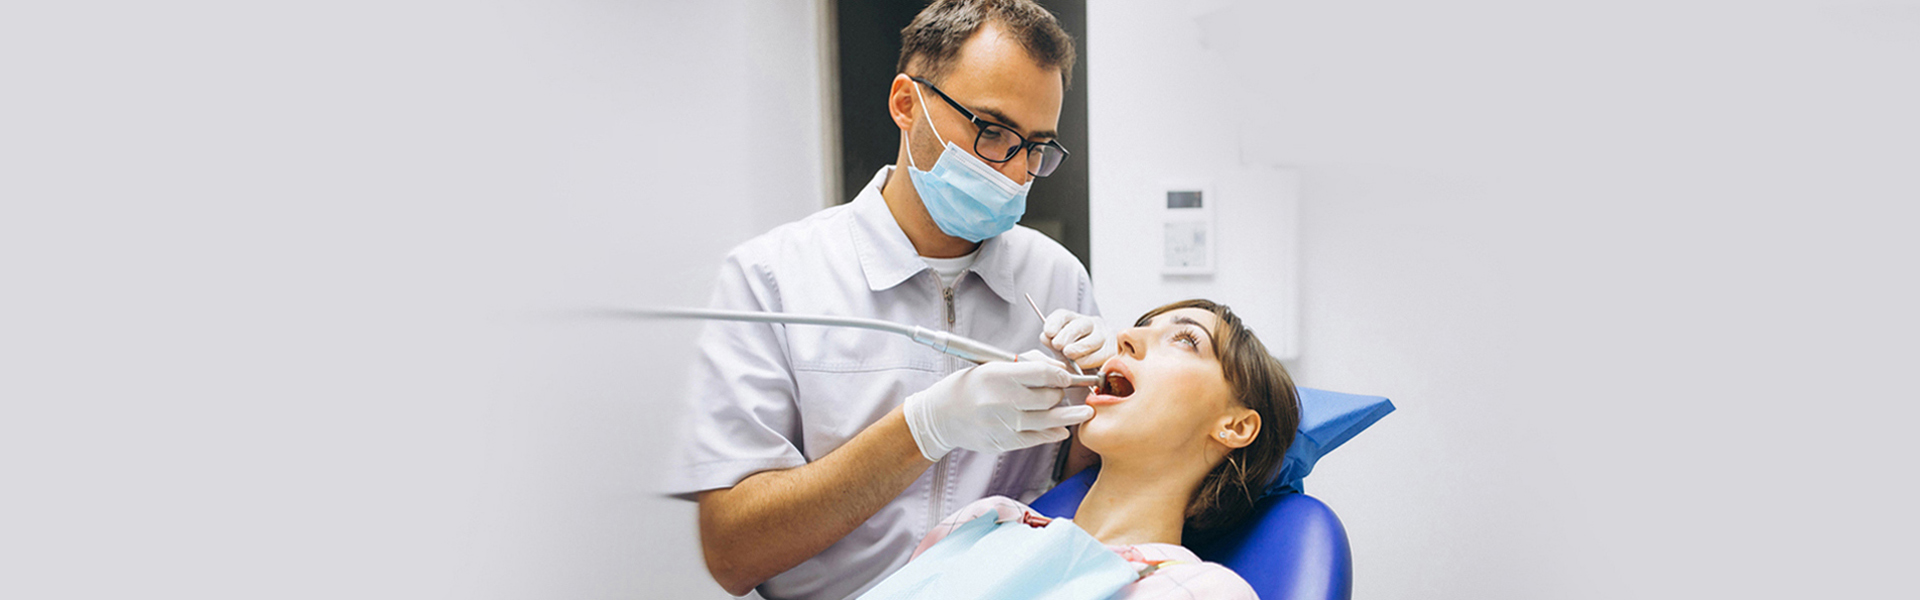 Patient's Guide to Maintaining Oral Health After Ridge Preservation